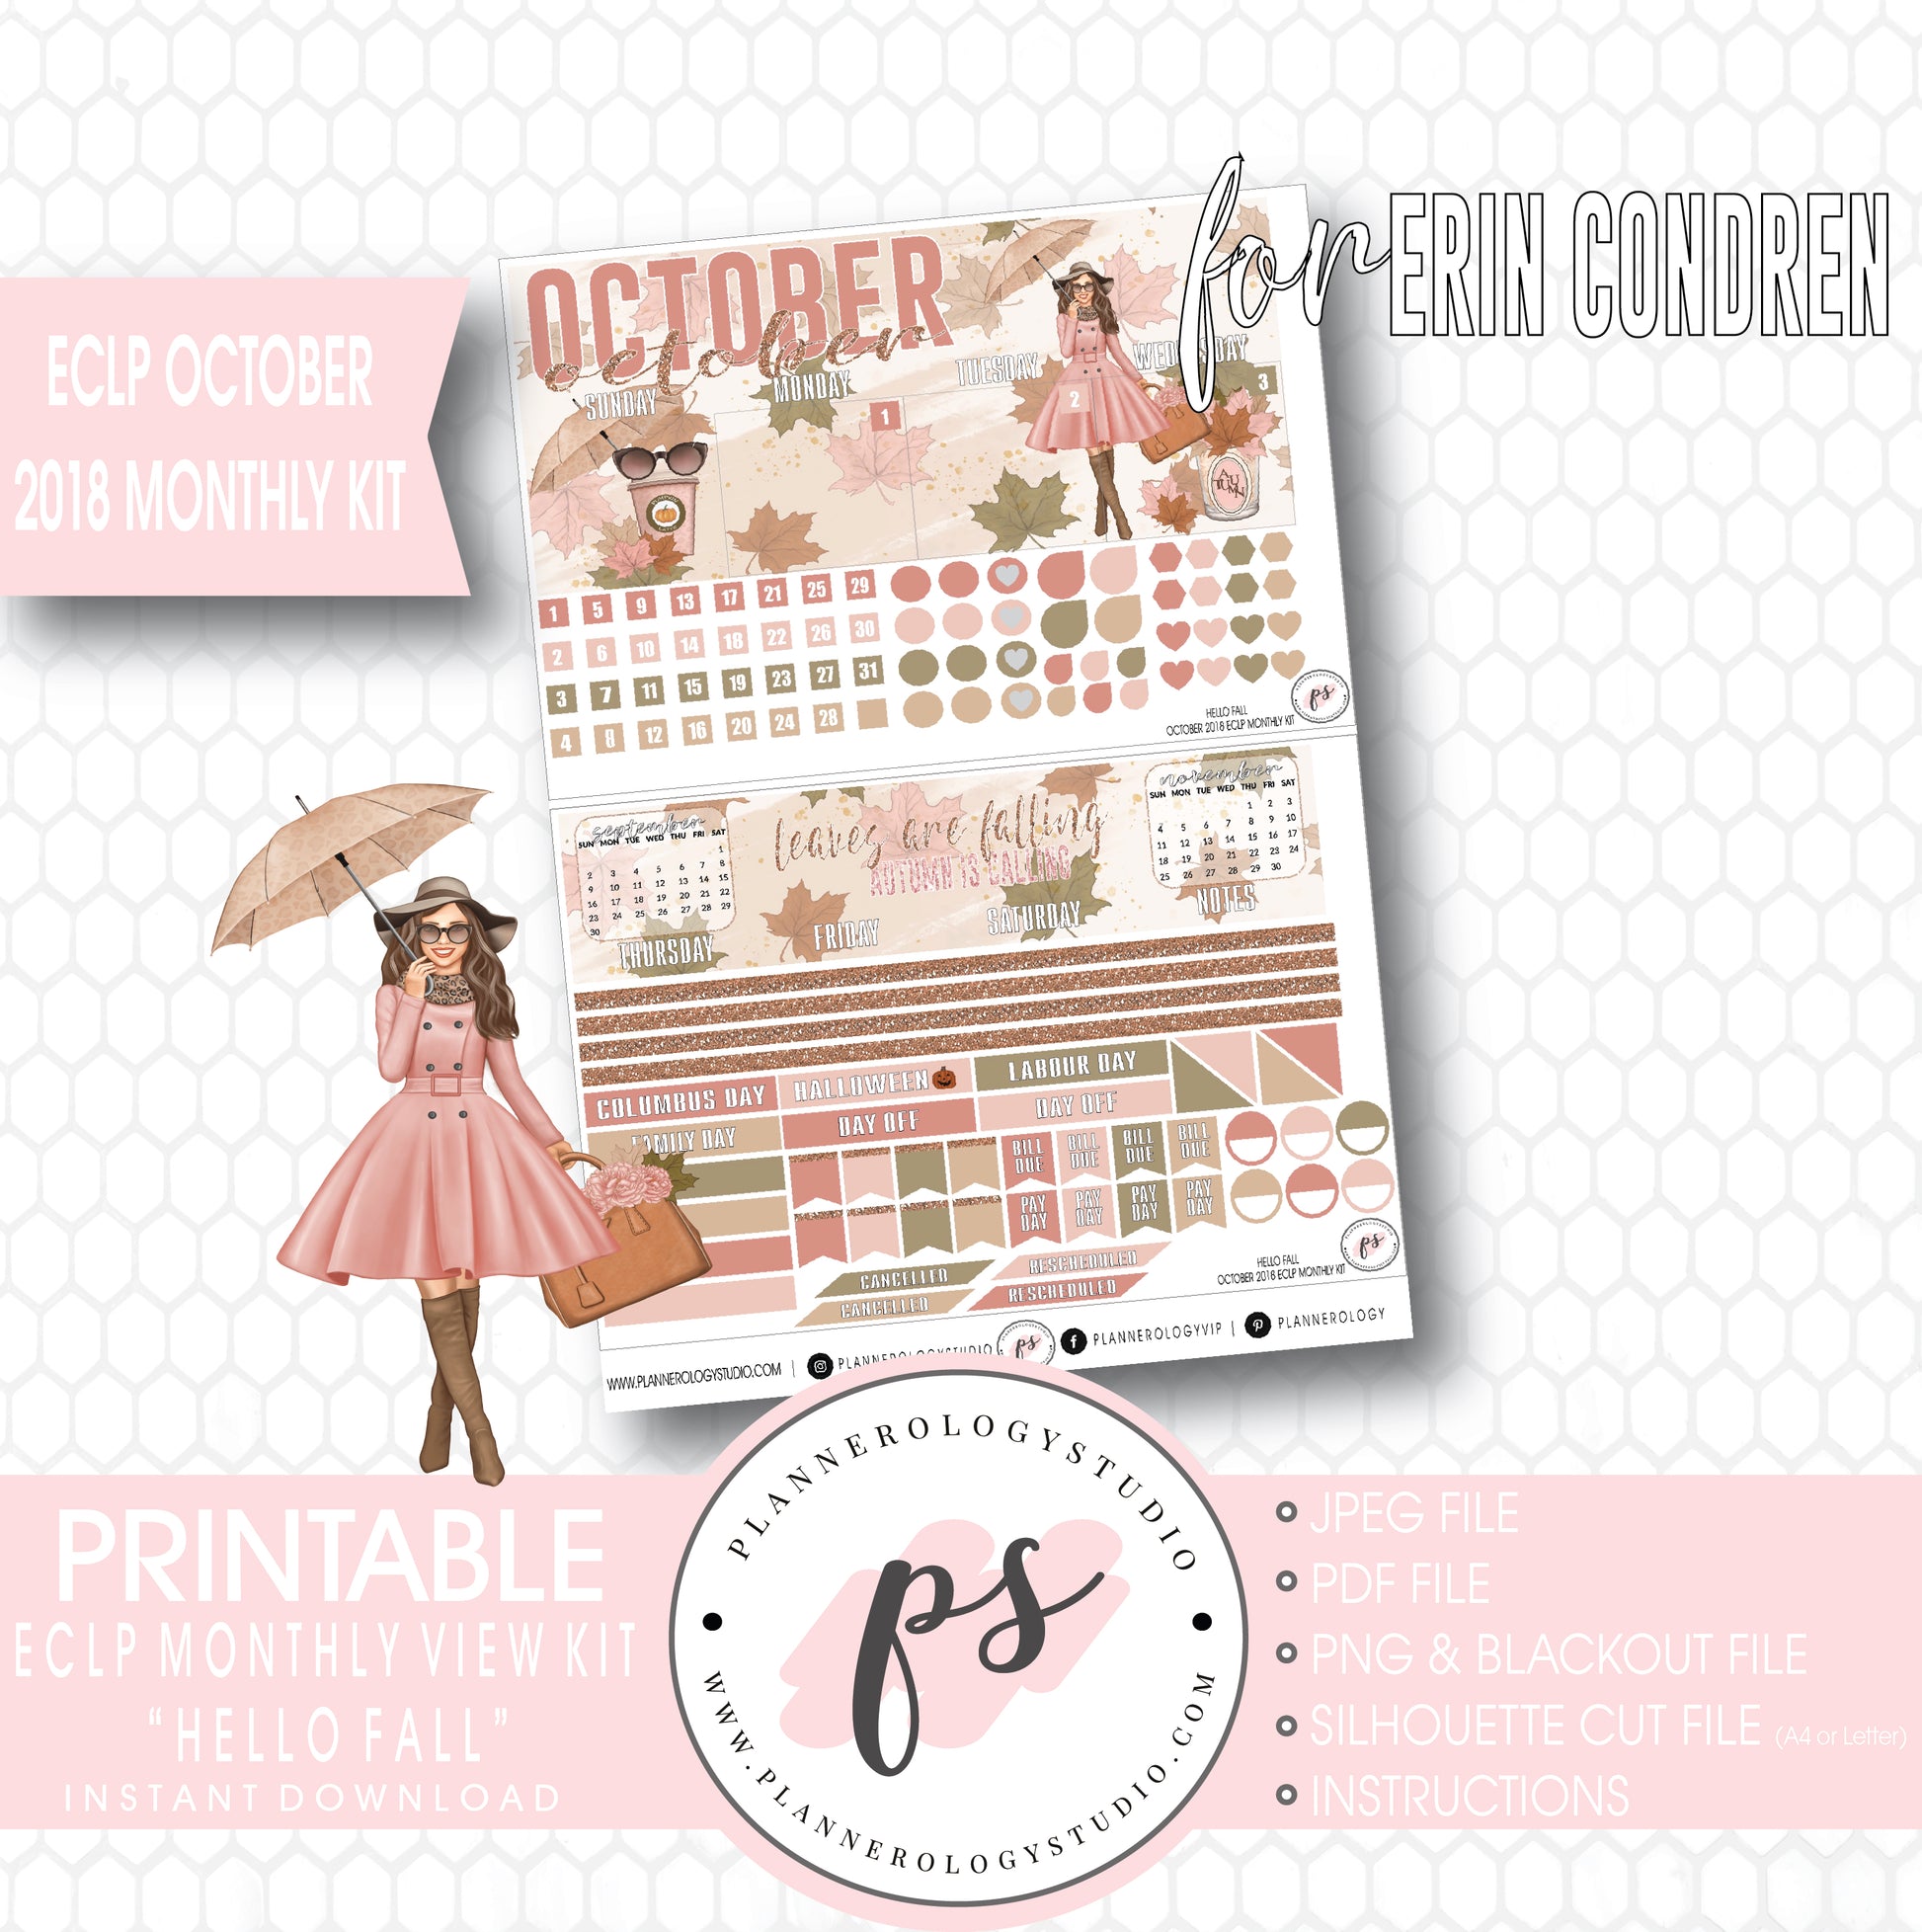 Hello Fall October 2018 Monthly View Kit Digital Printable Planner Stickers (for use with Erin Condren) - Plannerologystudio